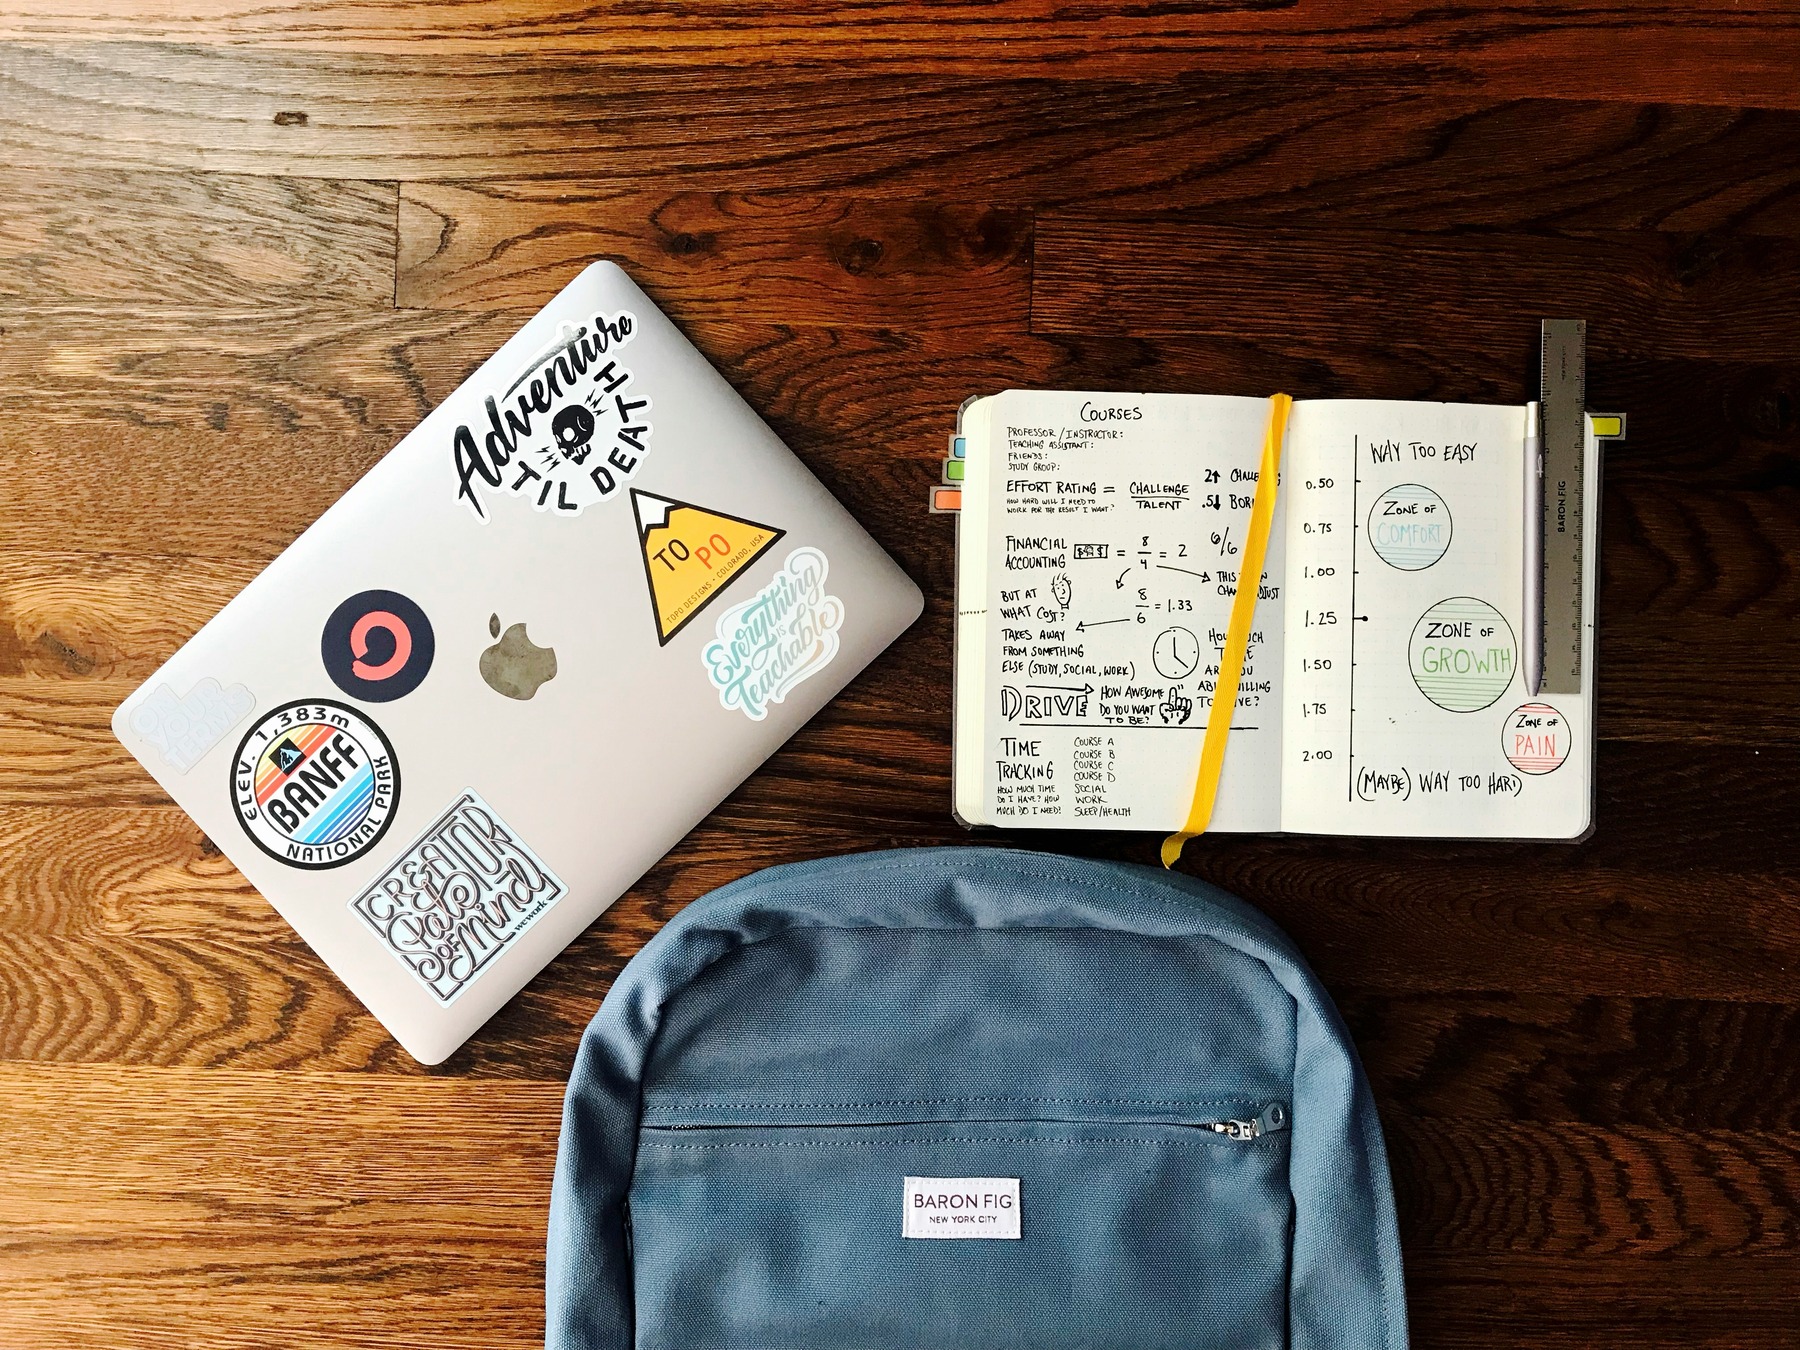 Notebook, laptop and a bag on a wooden table